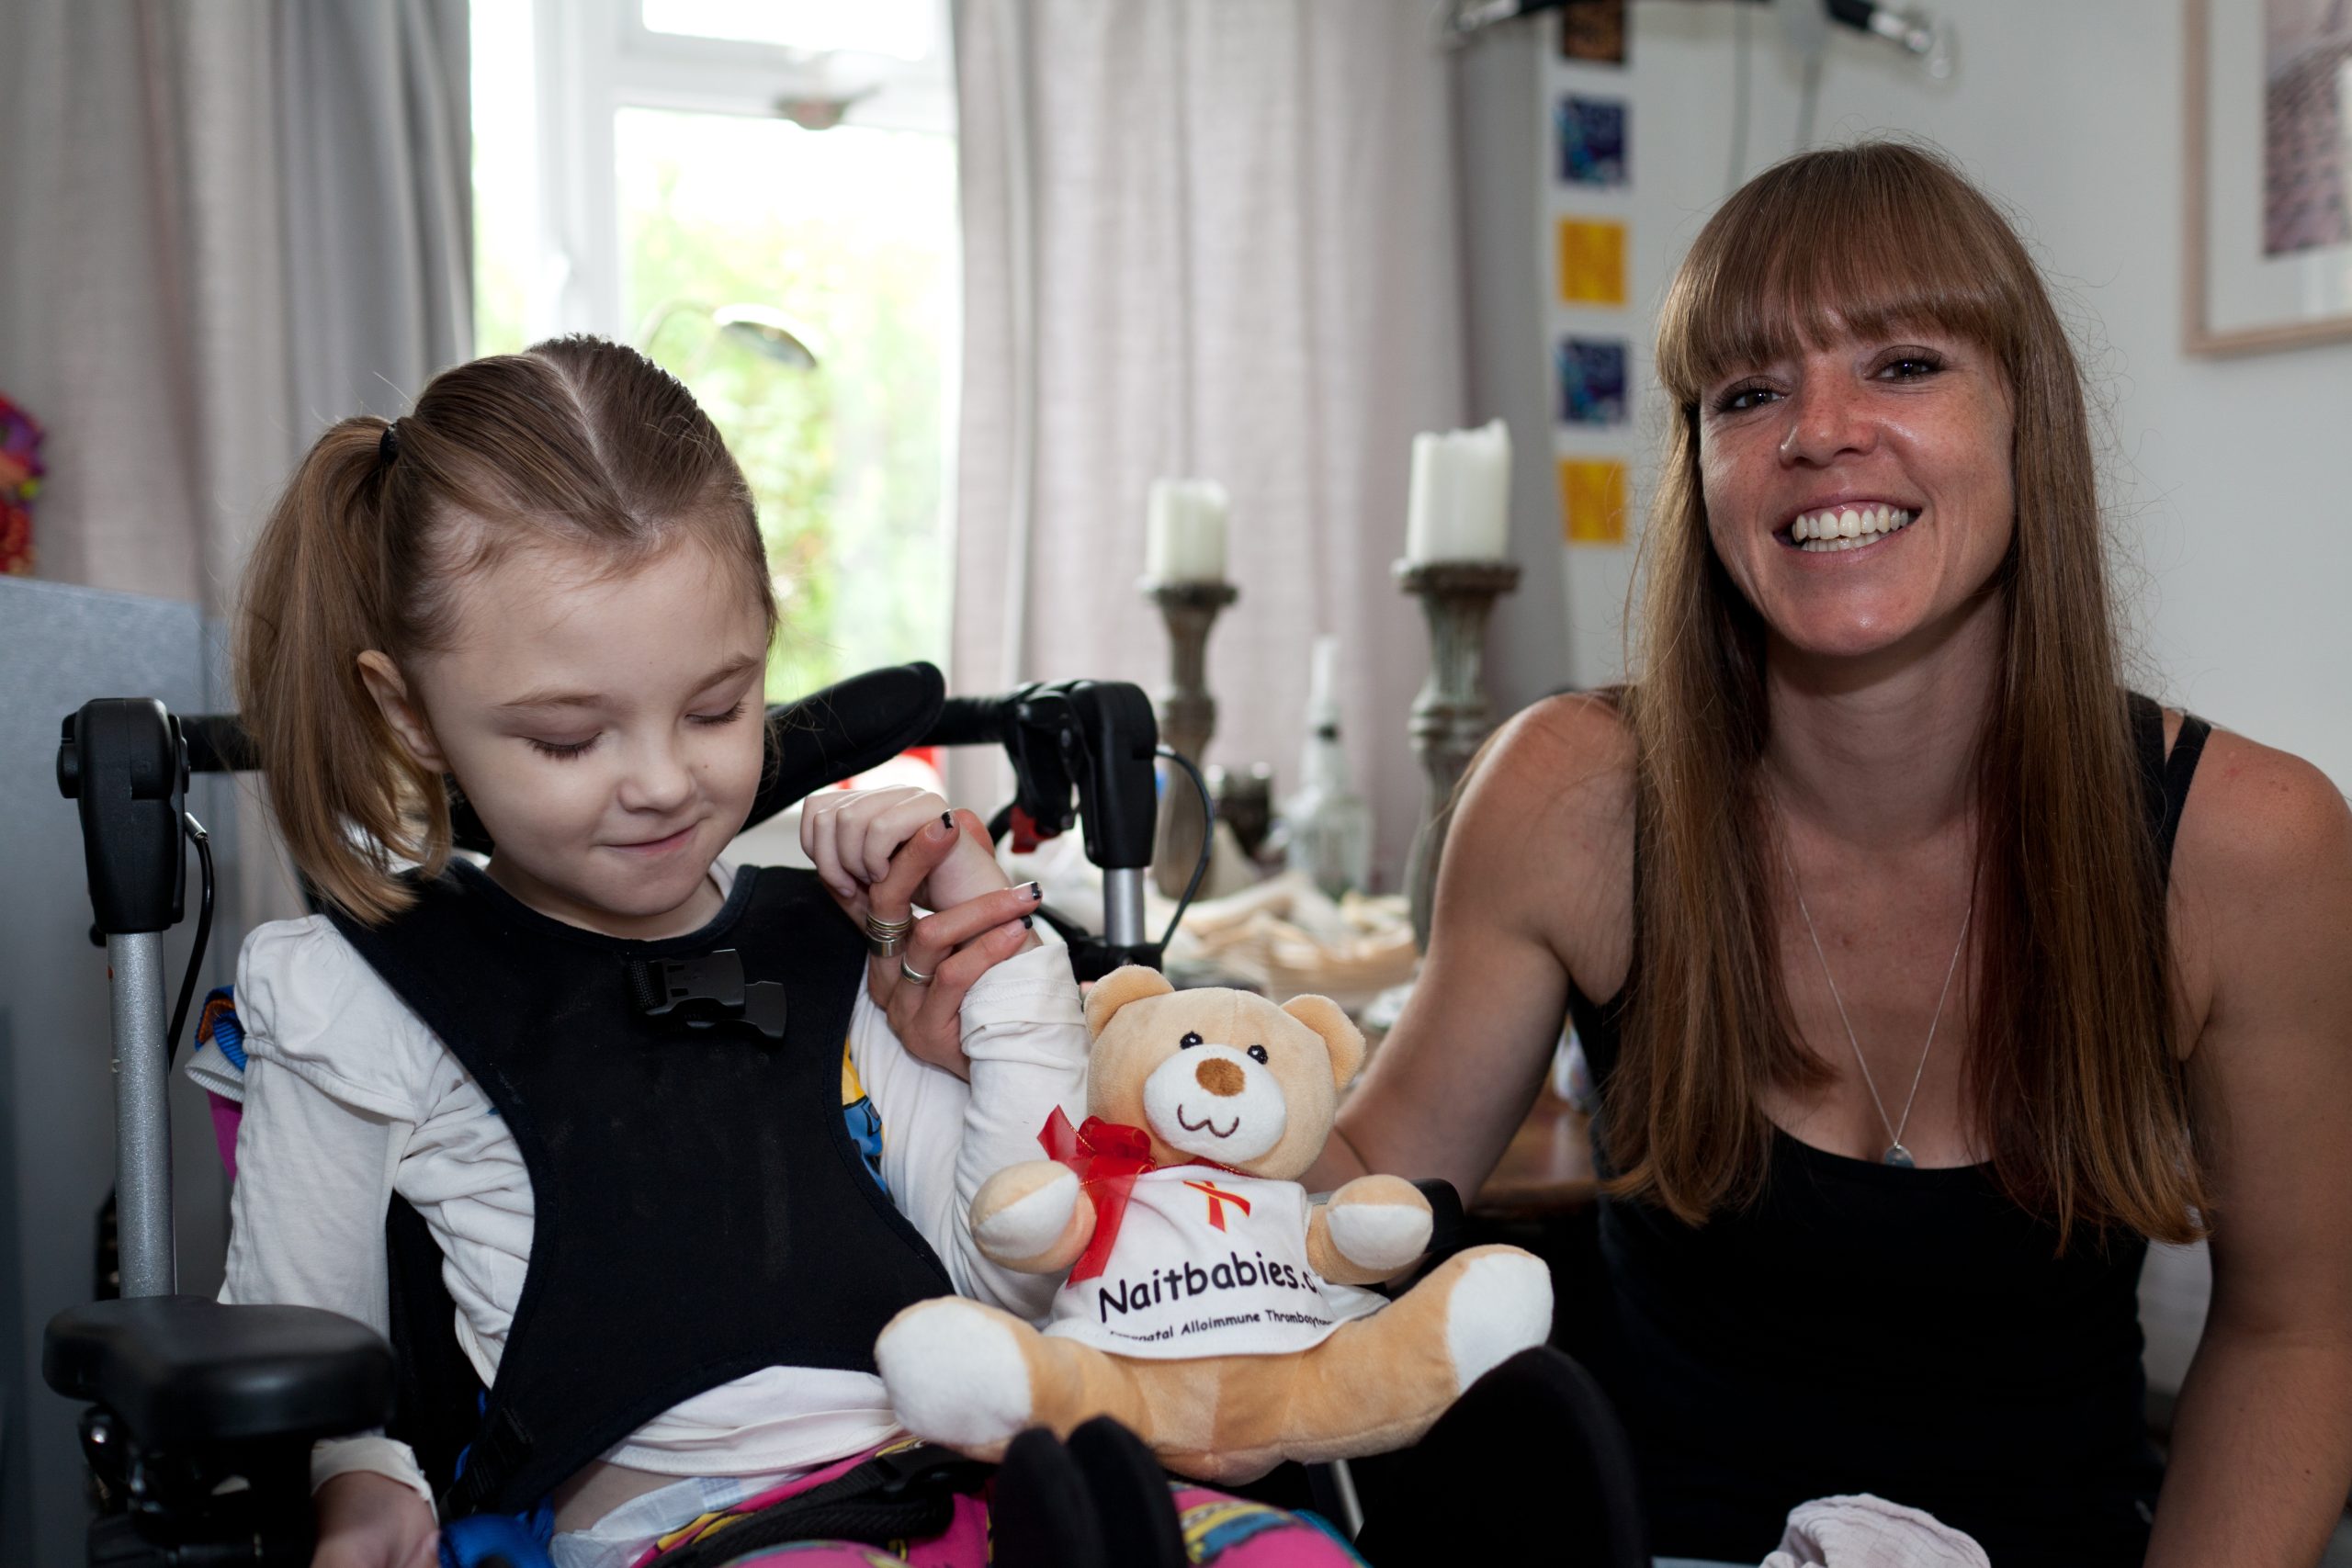 A girl sat in a wheelchair hold on to the hand of an adult woman with long straight hair. Between them sits a small toy bear that has 'naitbabies' written on it's small shirt.